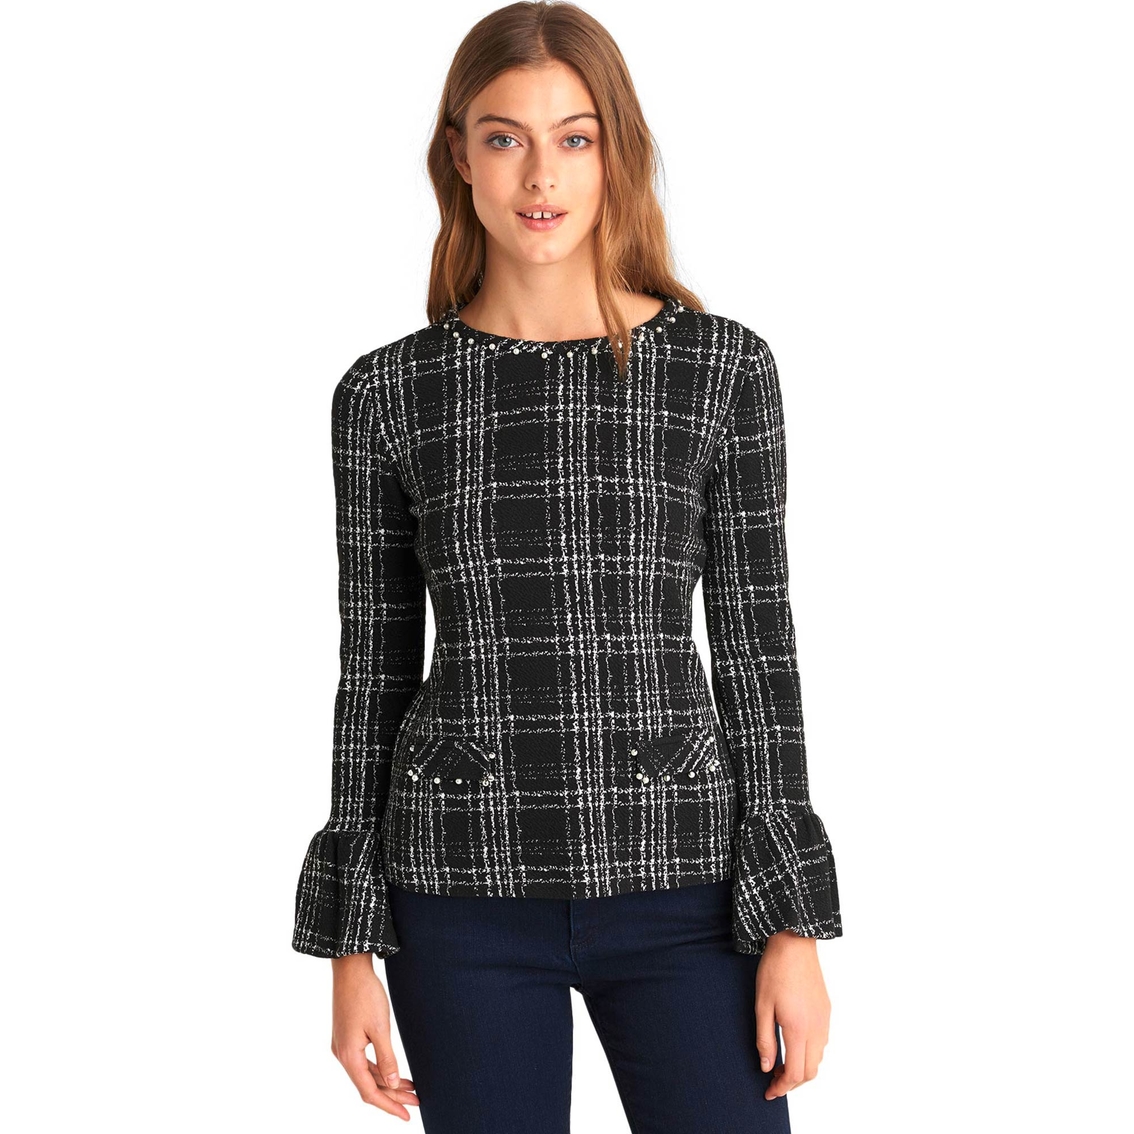 Karl Lagerfeld Plaid Knit Top | Tops | Clothing & Accessories | Shop ...